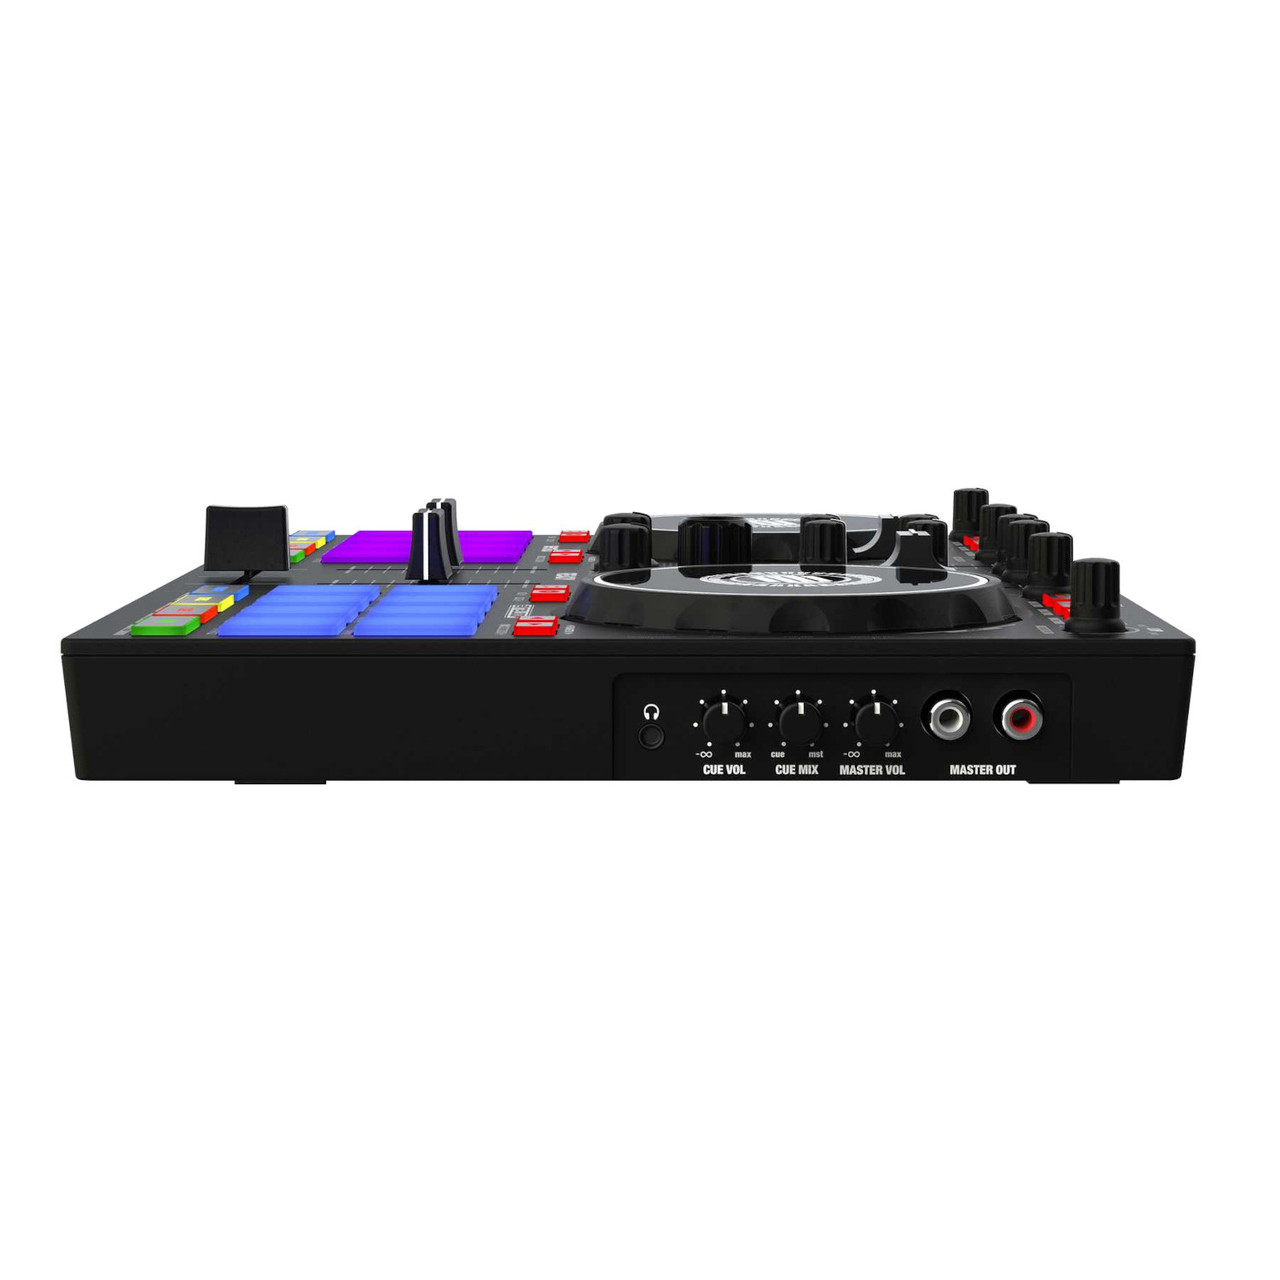 Reloop Ready Portable Serato DJ Controller - Sound Productions